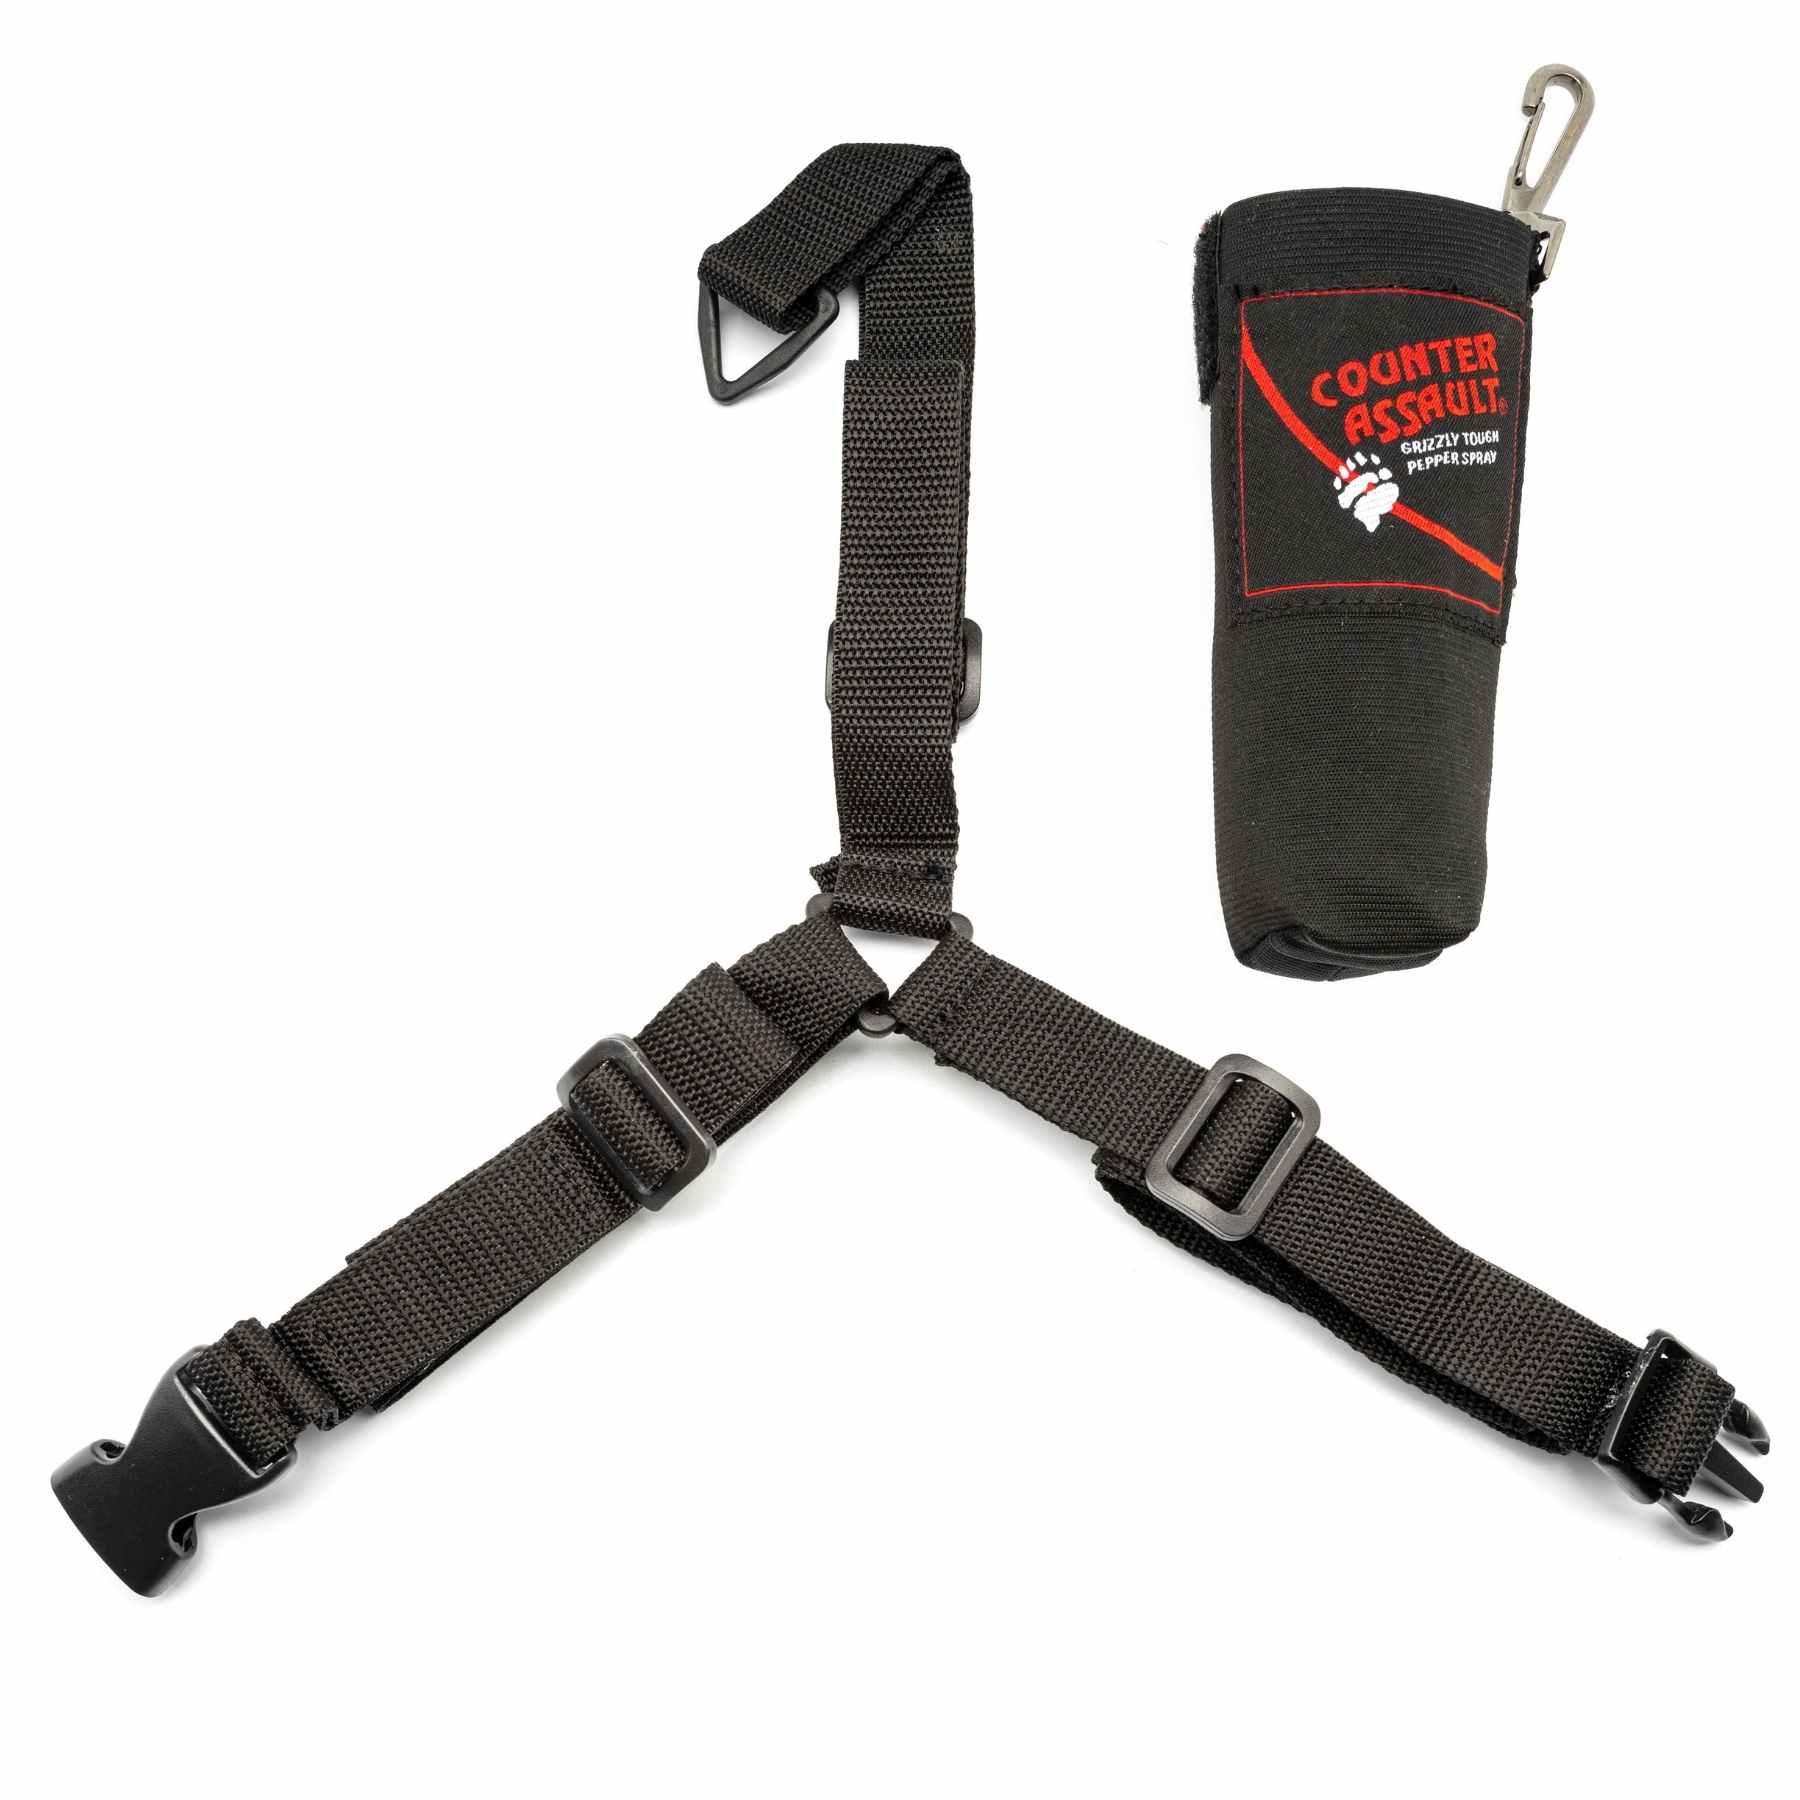 3 in 1 chest holster for Counter Assault spray